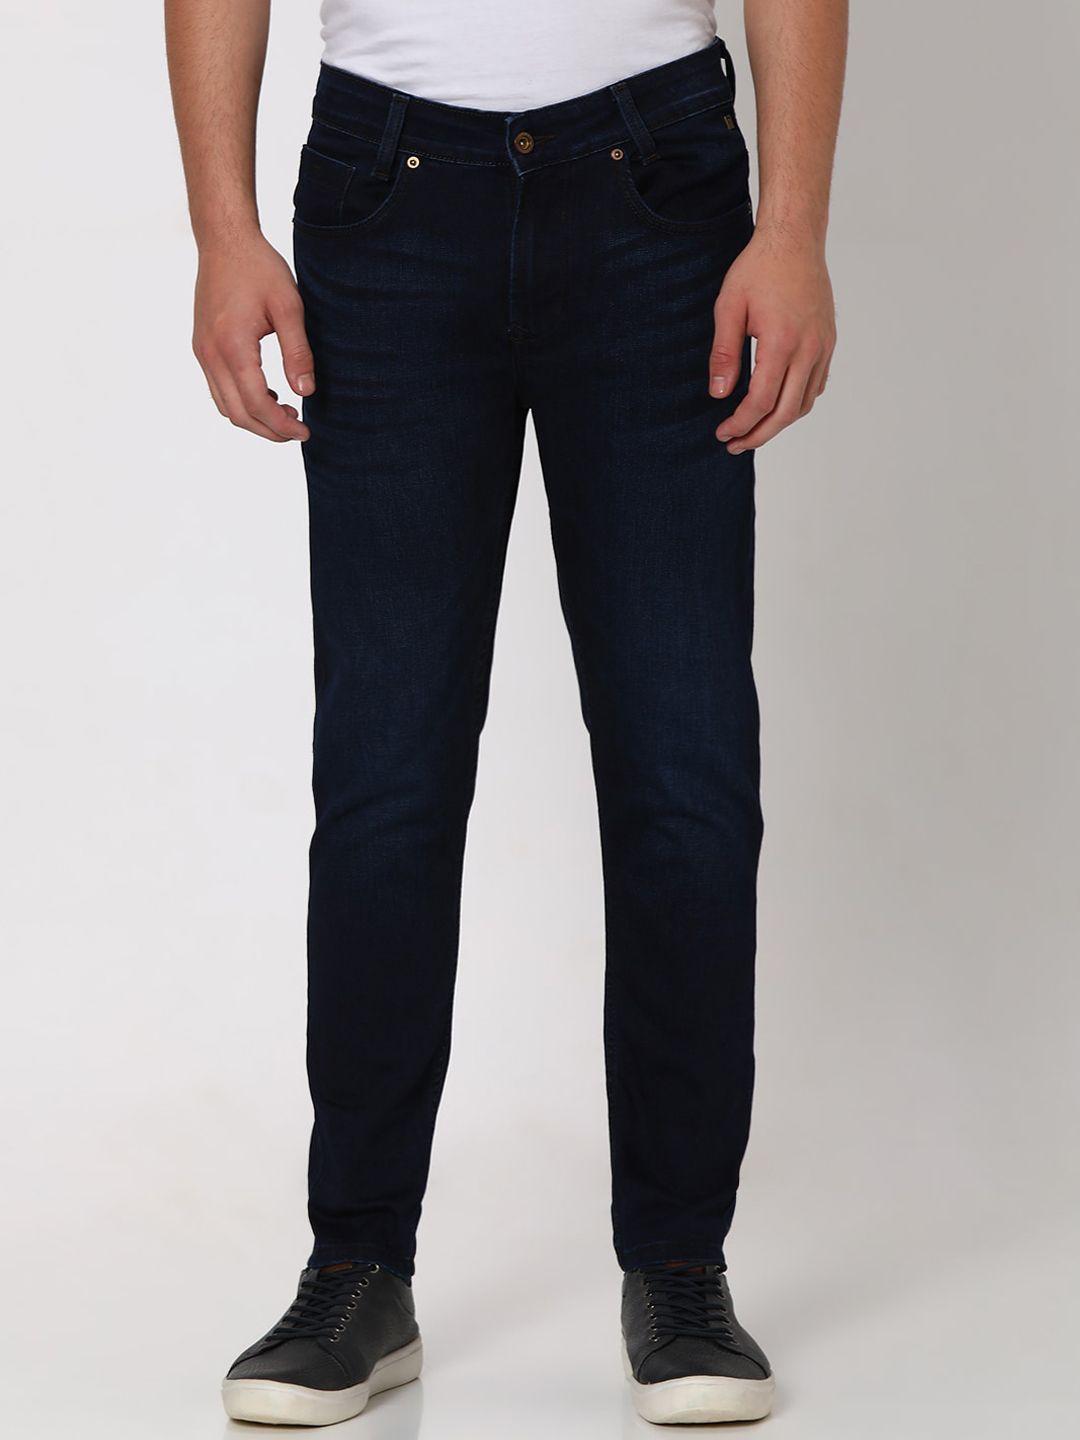 mufti-men-navy-blue-slim-fit-stretchable-jeans